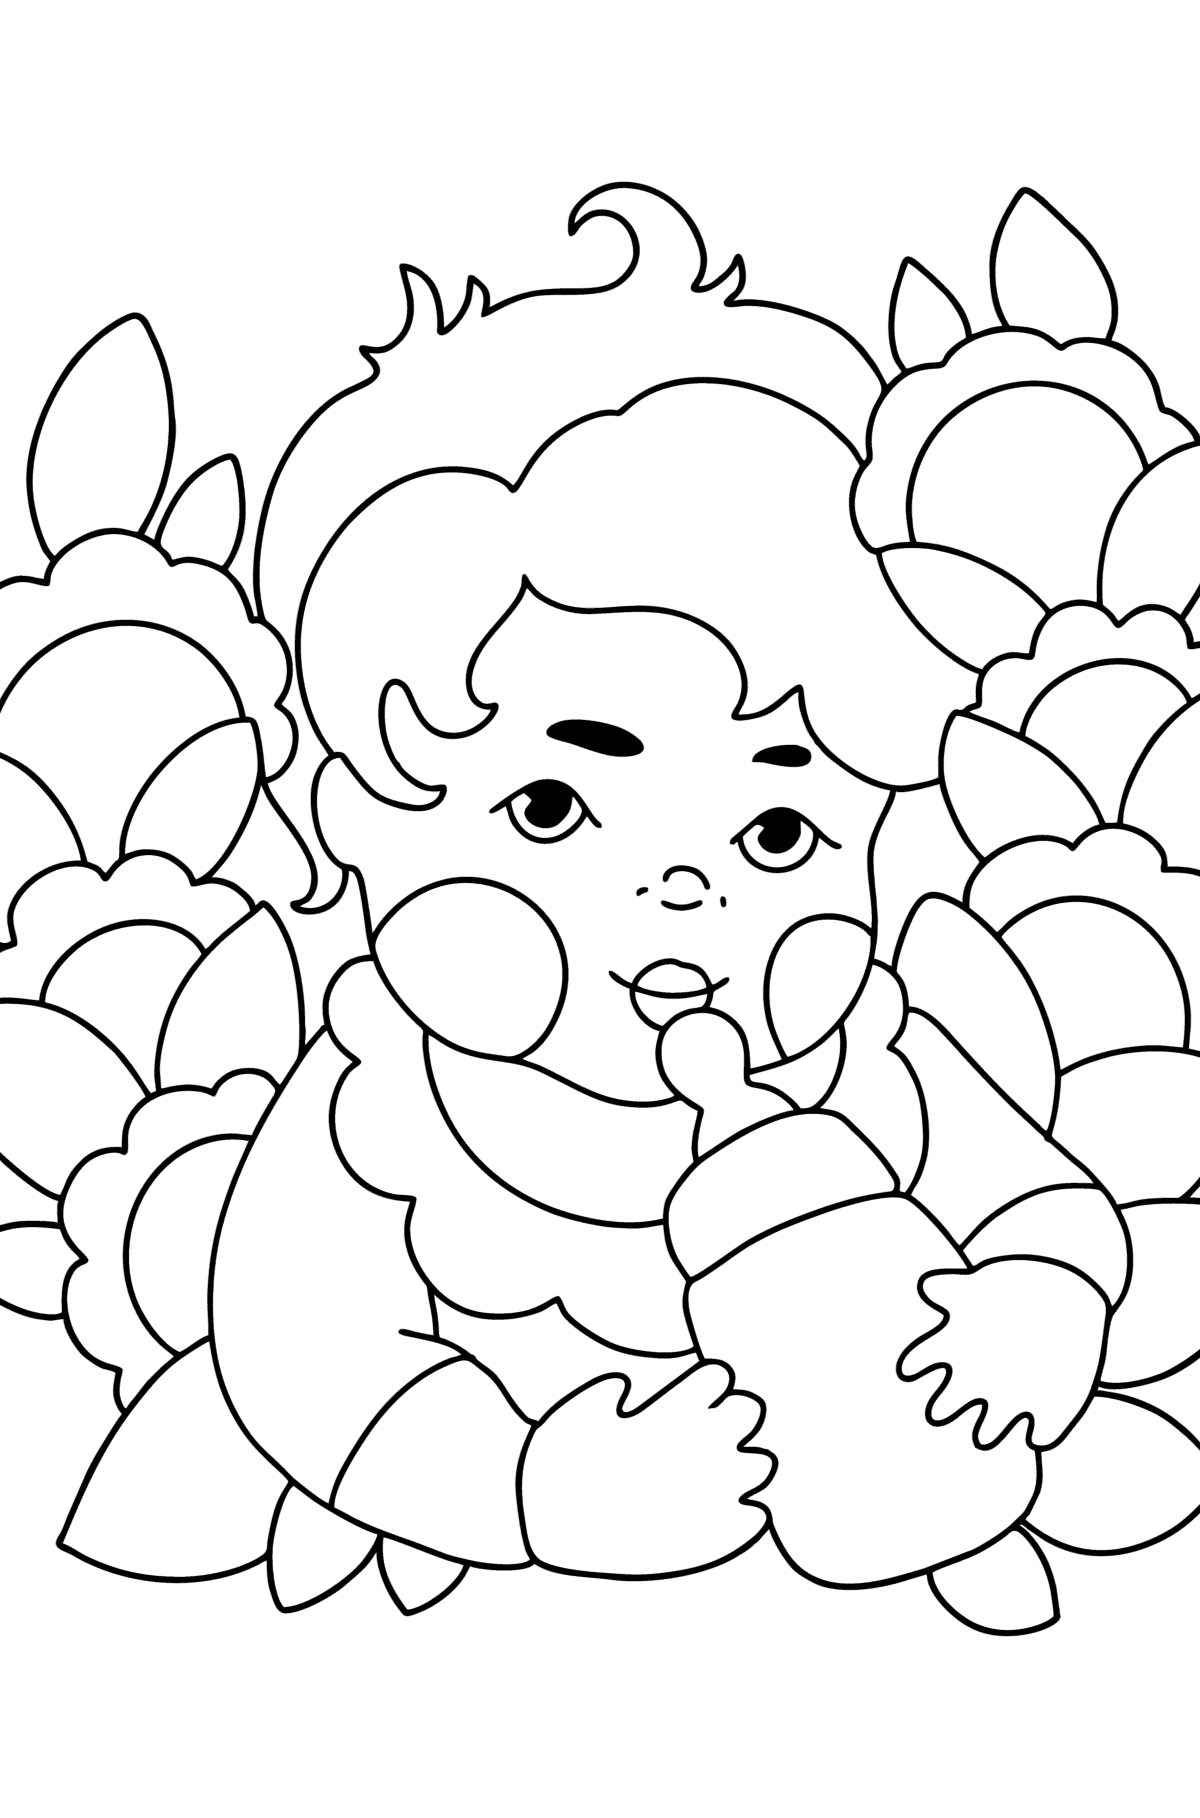 Baby сoloring page - Coloring Pages for Kids